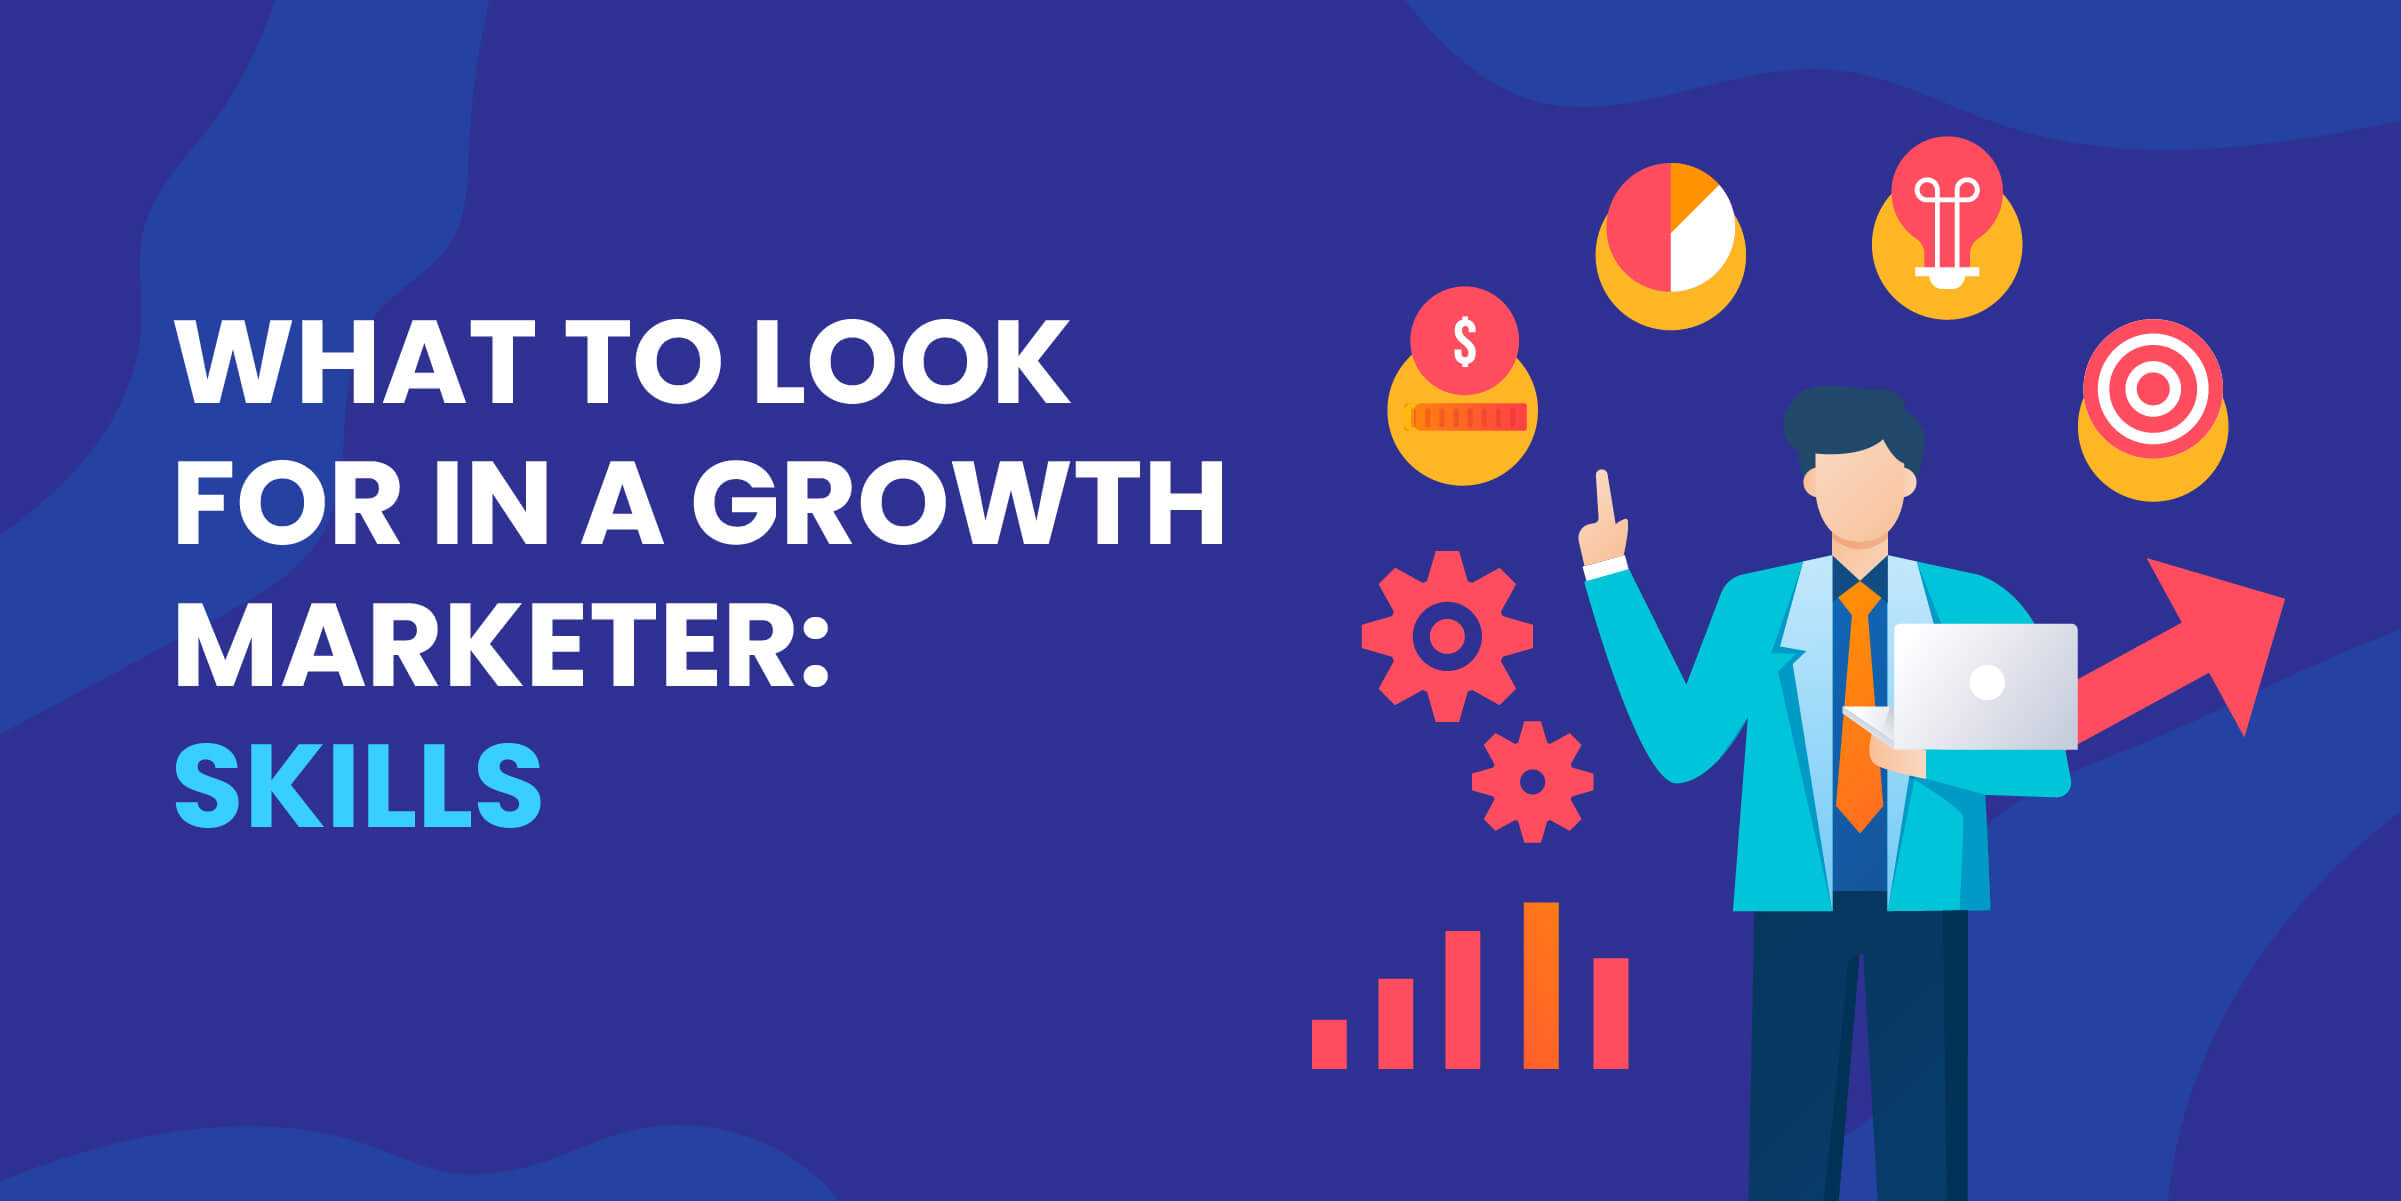 What to Look for in Growth Marketer - Skills